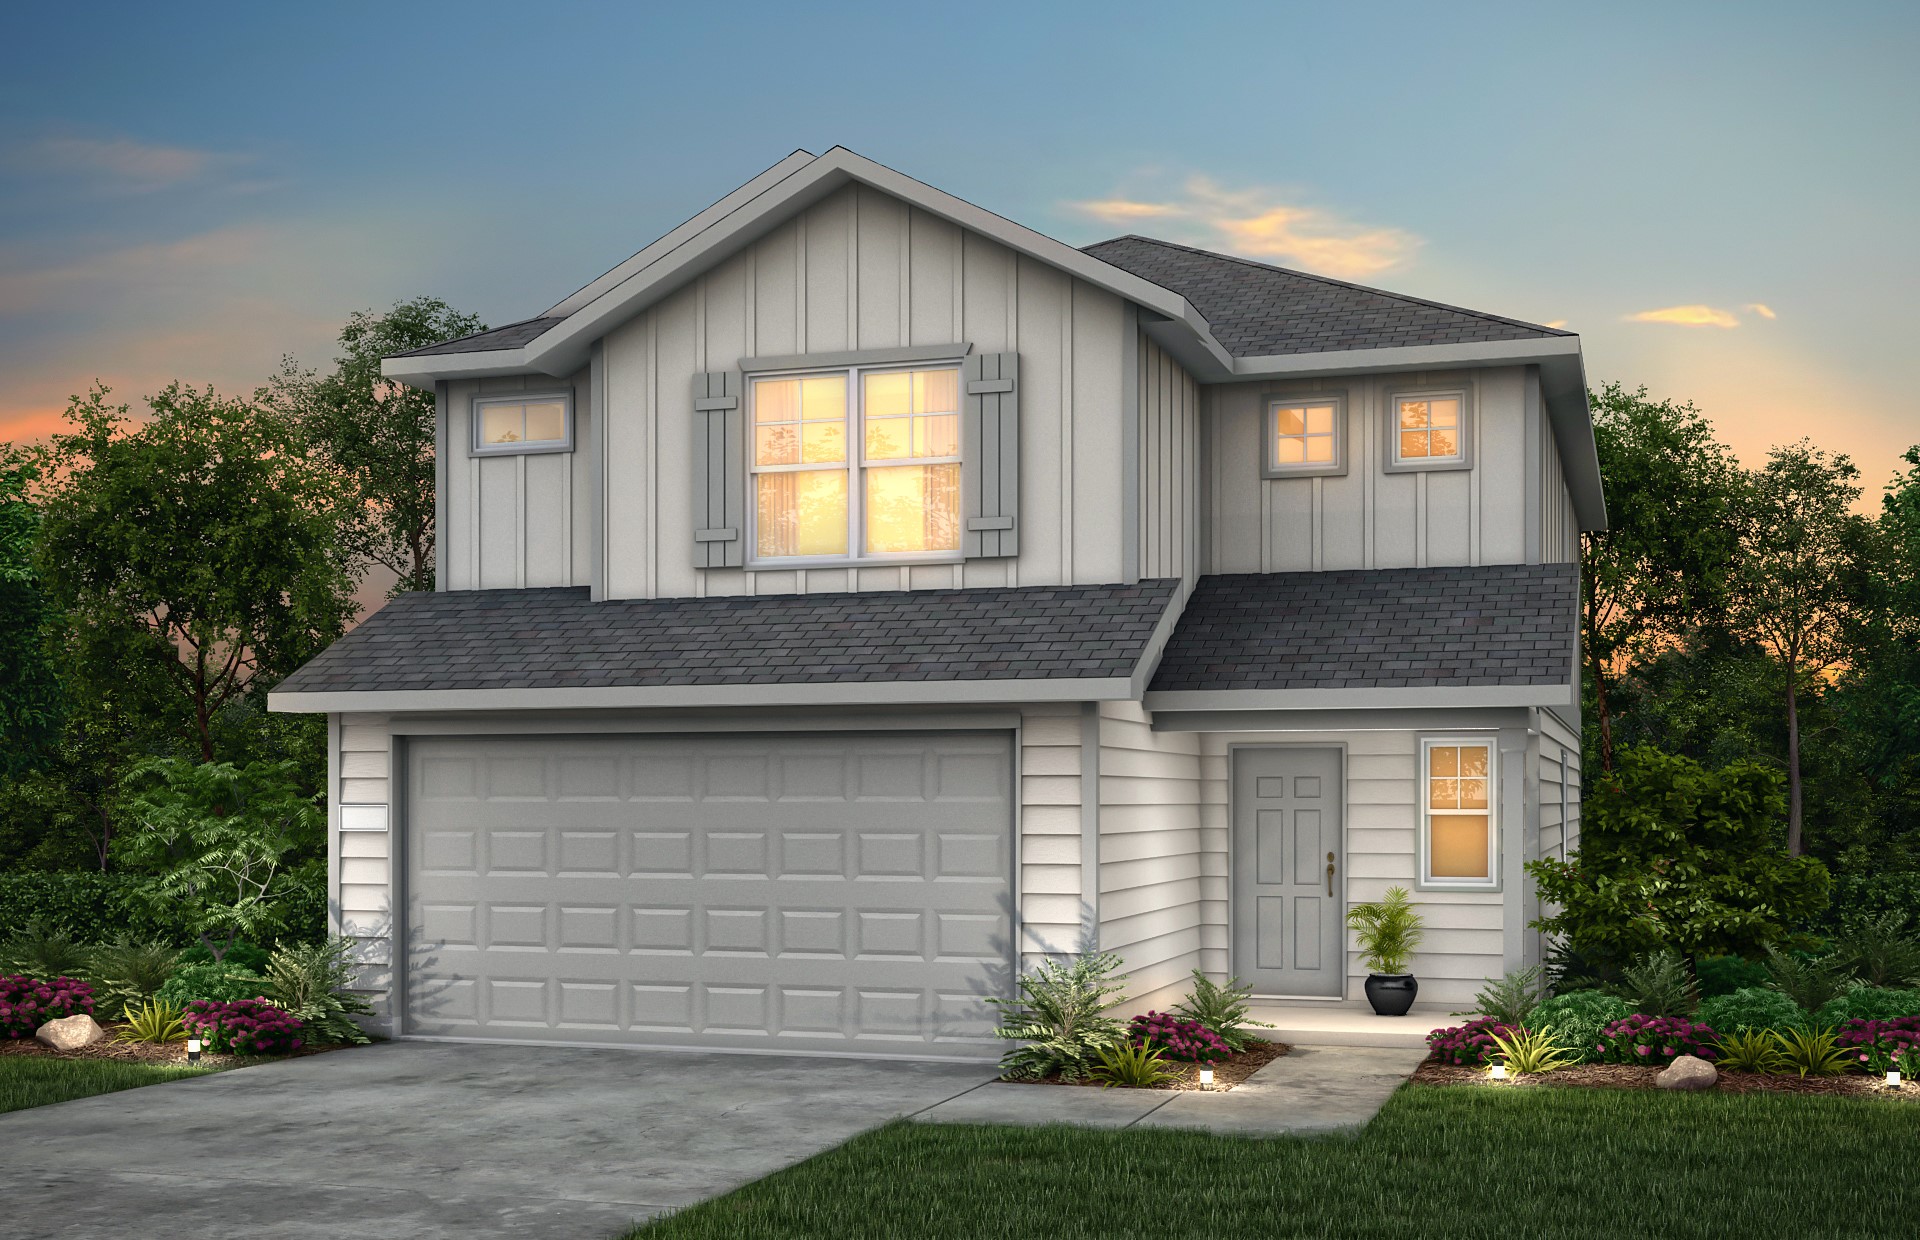 Elevation T. Rendering is representative of the home exterior upon completion. 
